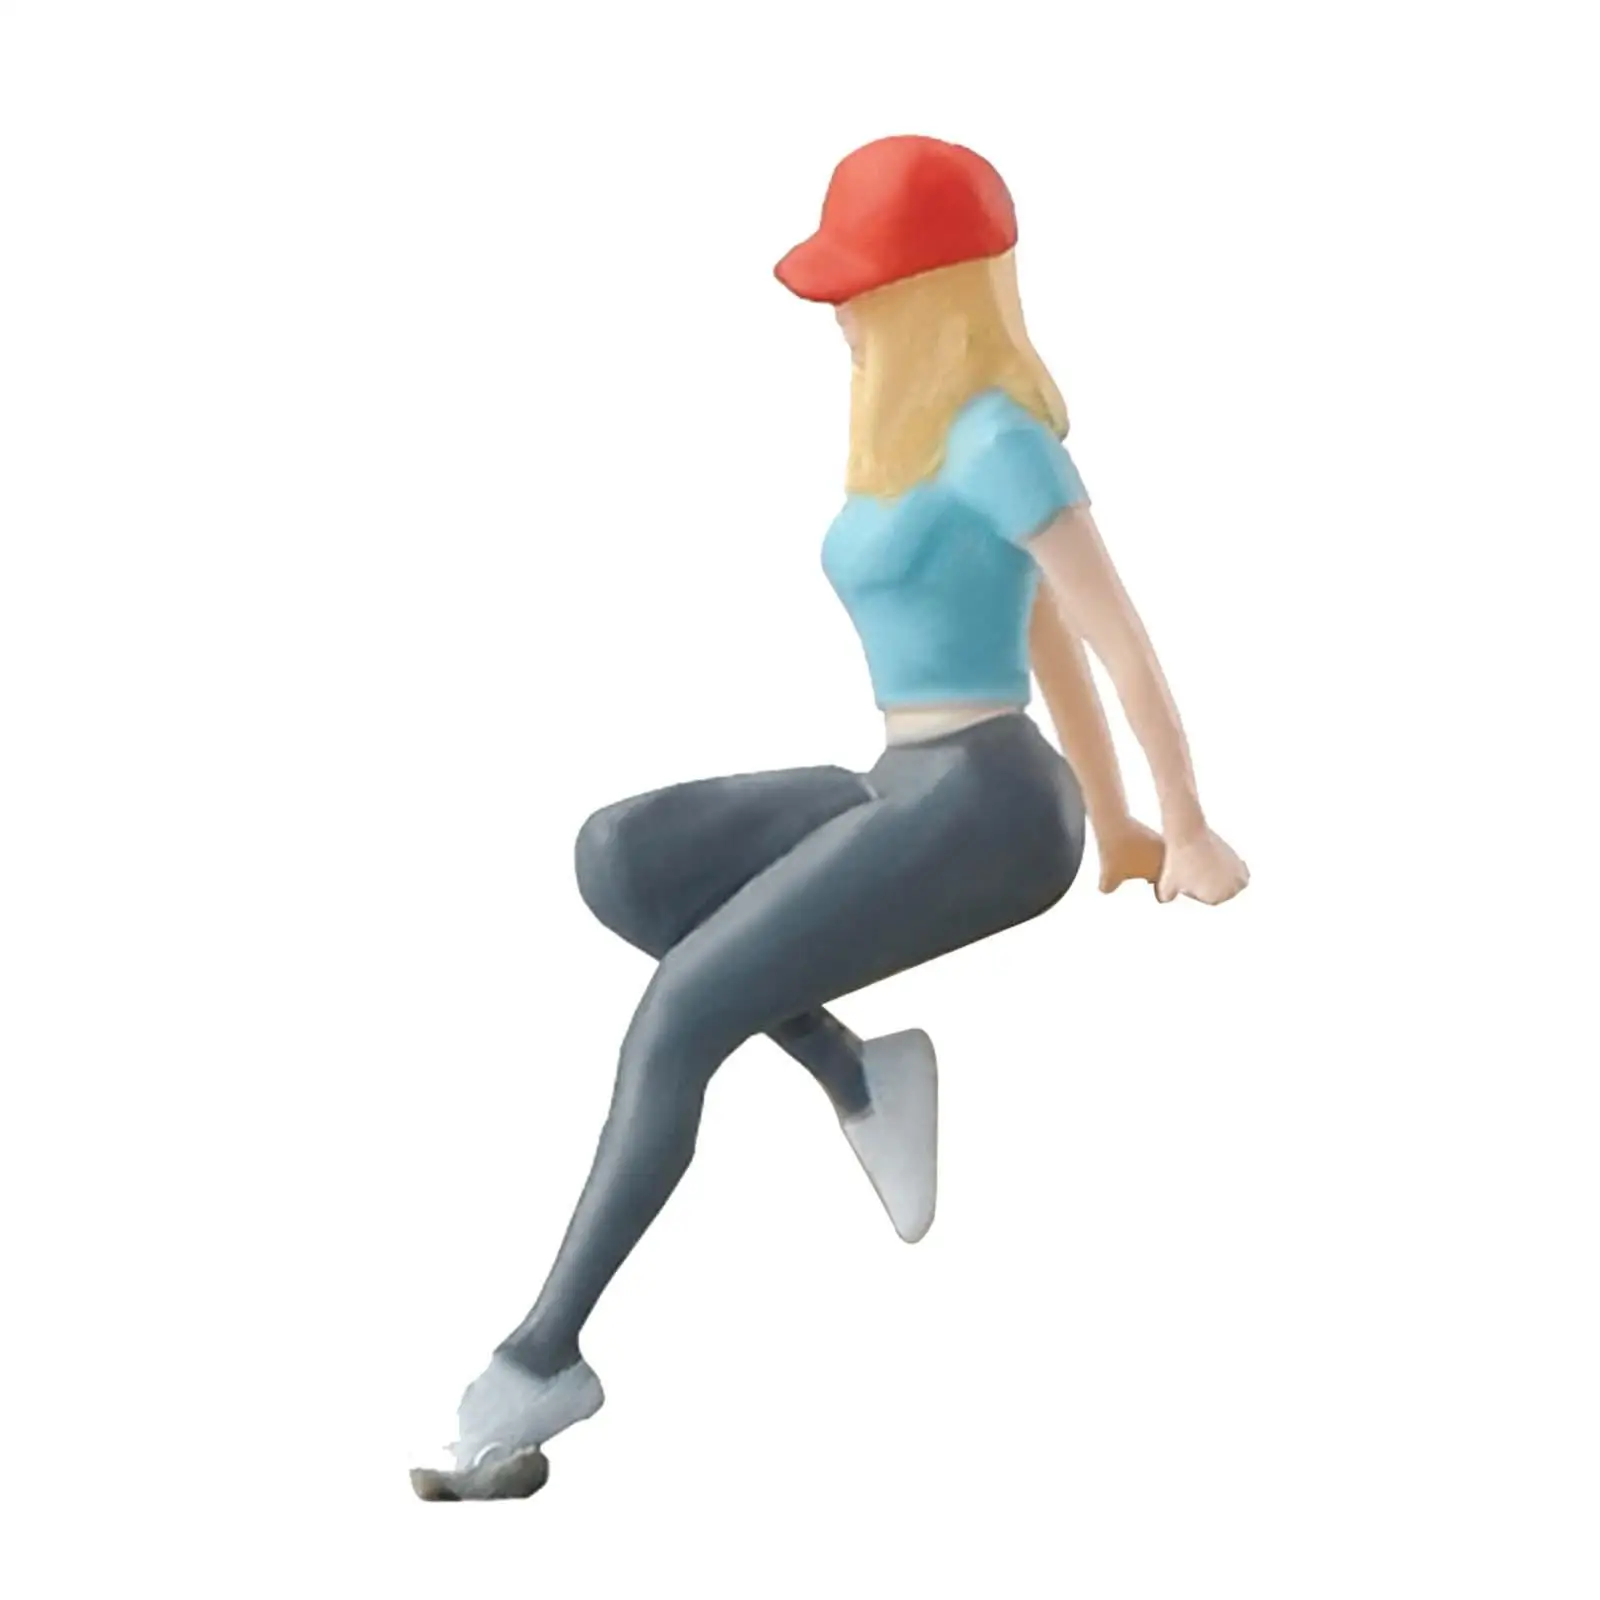 Simulated Girl Figures Architectural Character Model Painted Figures People Figurines for Architectural Building Miniature Scene